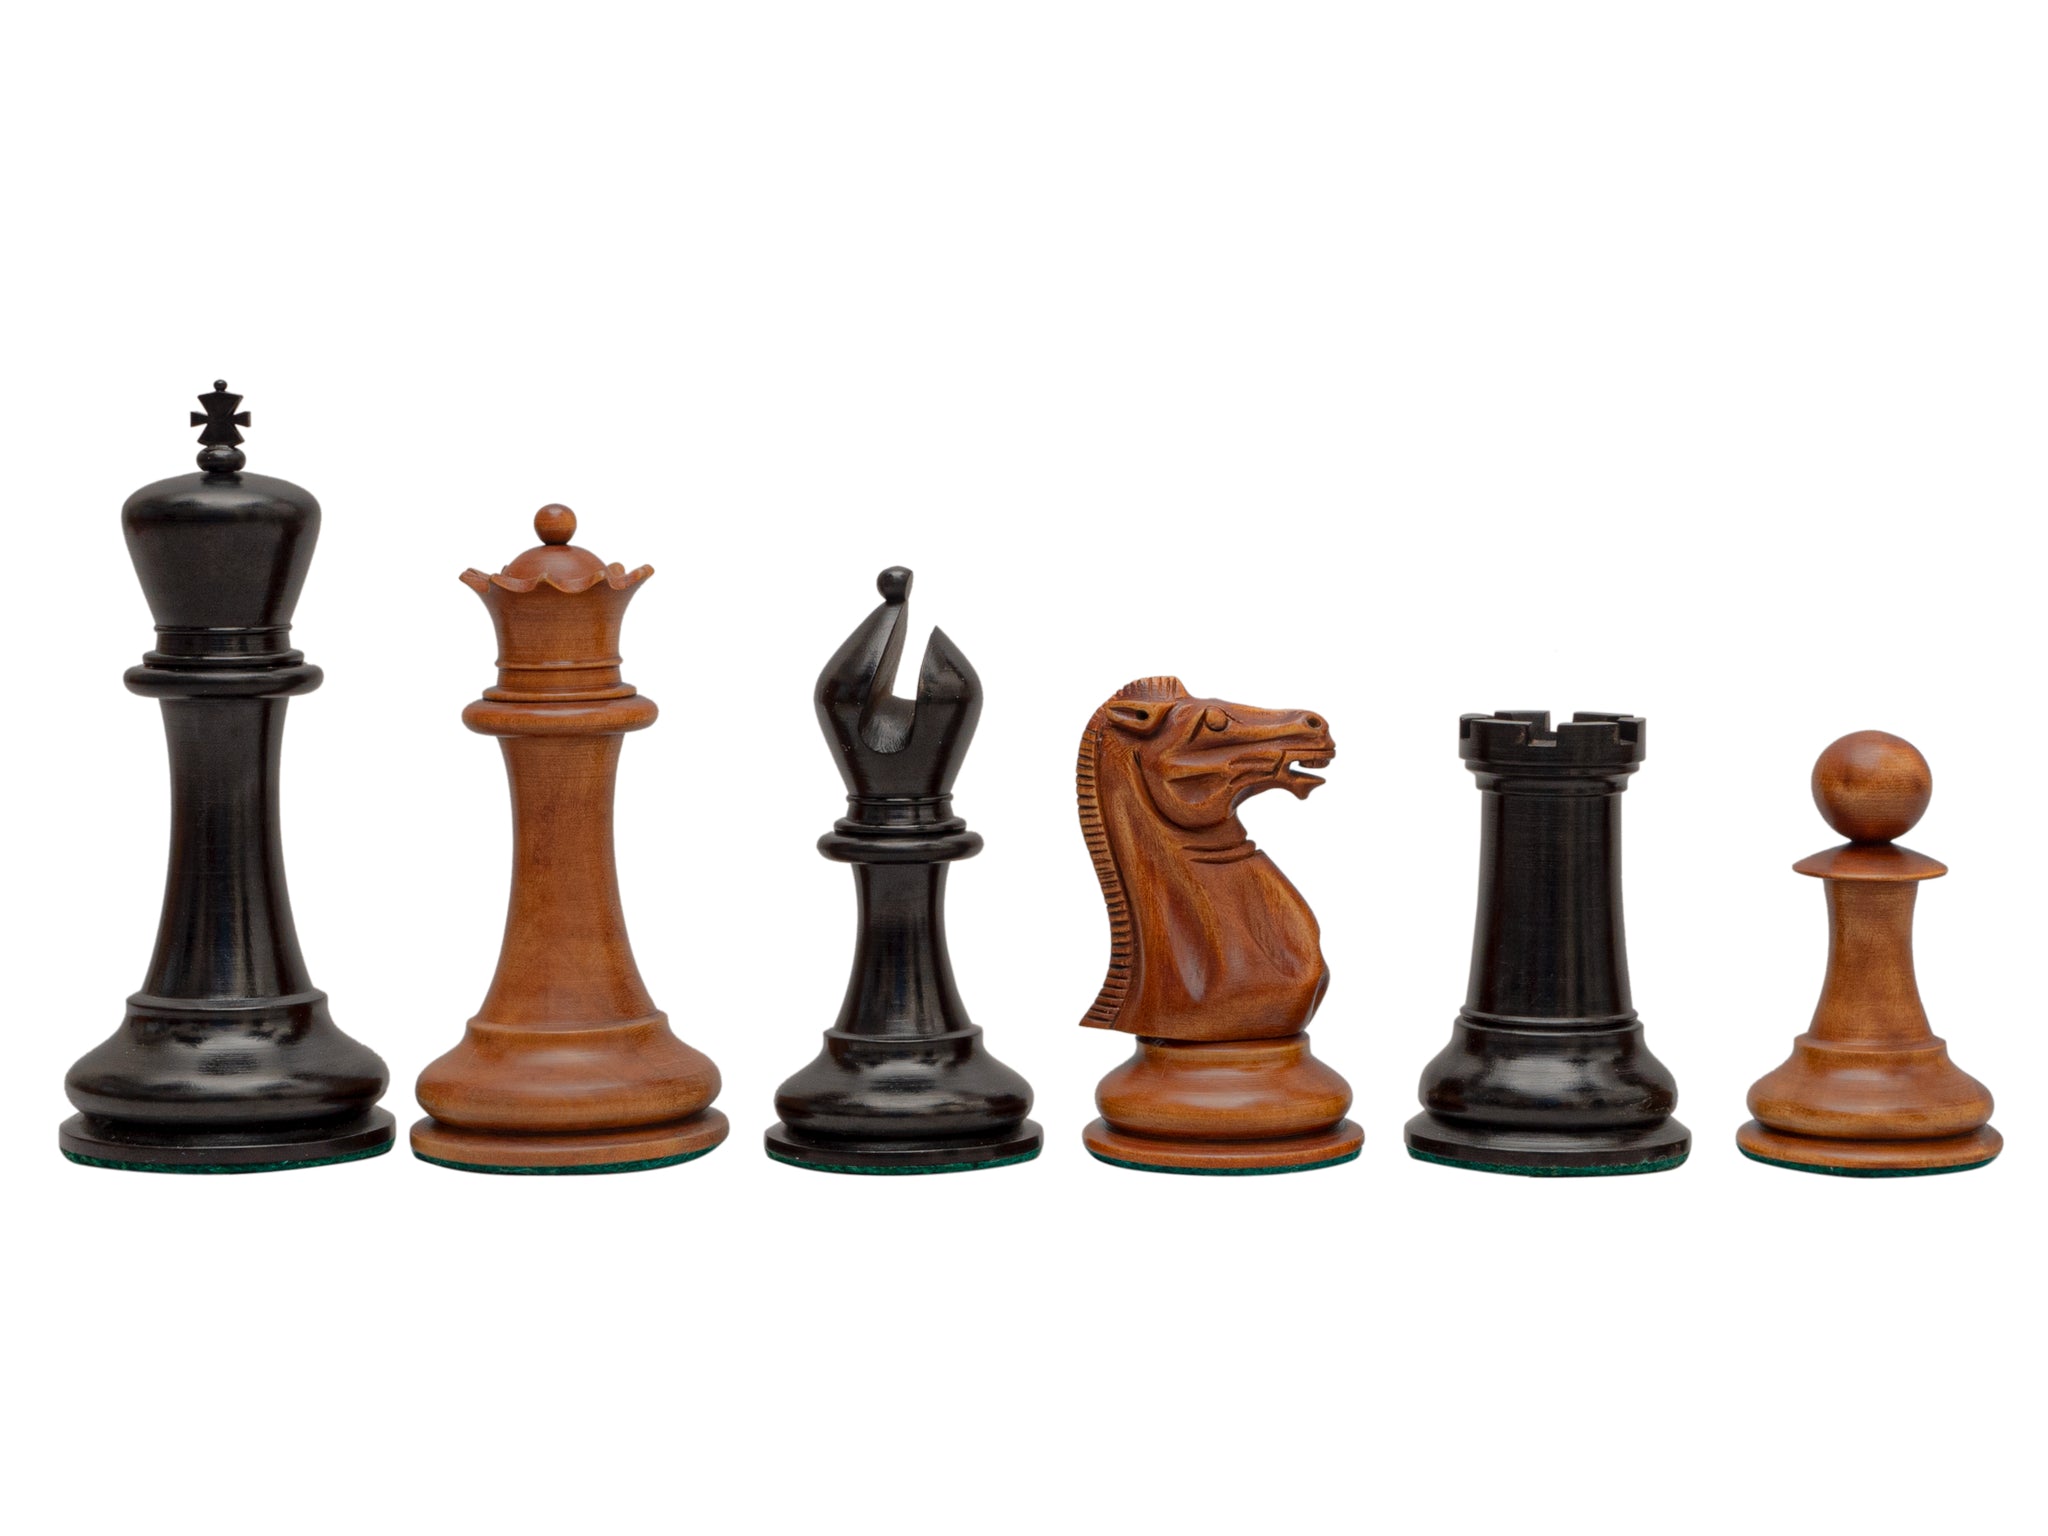 Reproduction Staunton Chessmen 1849 Model 4.4 inch King in Antiqued Boxwood and Ebony